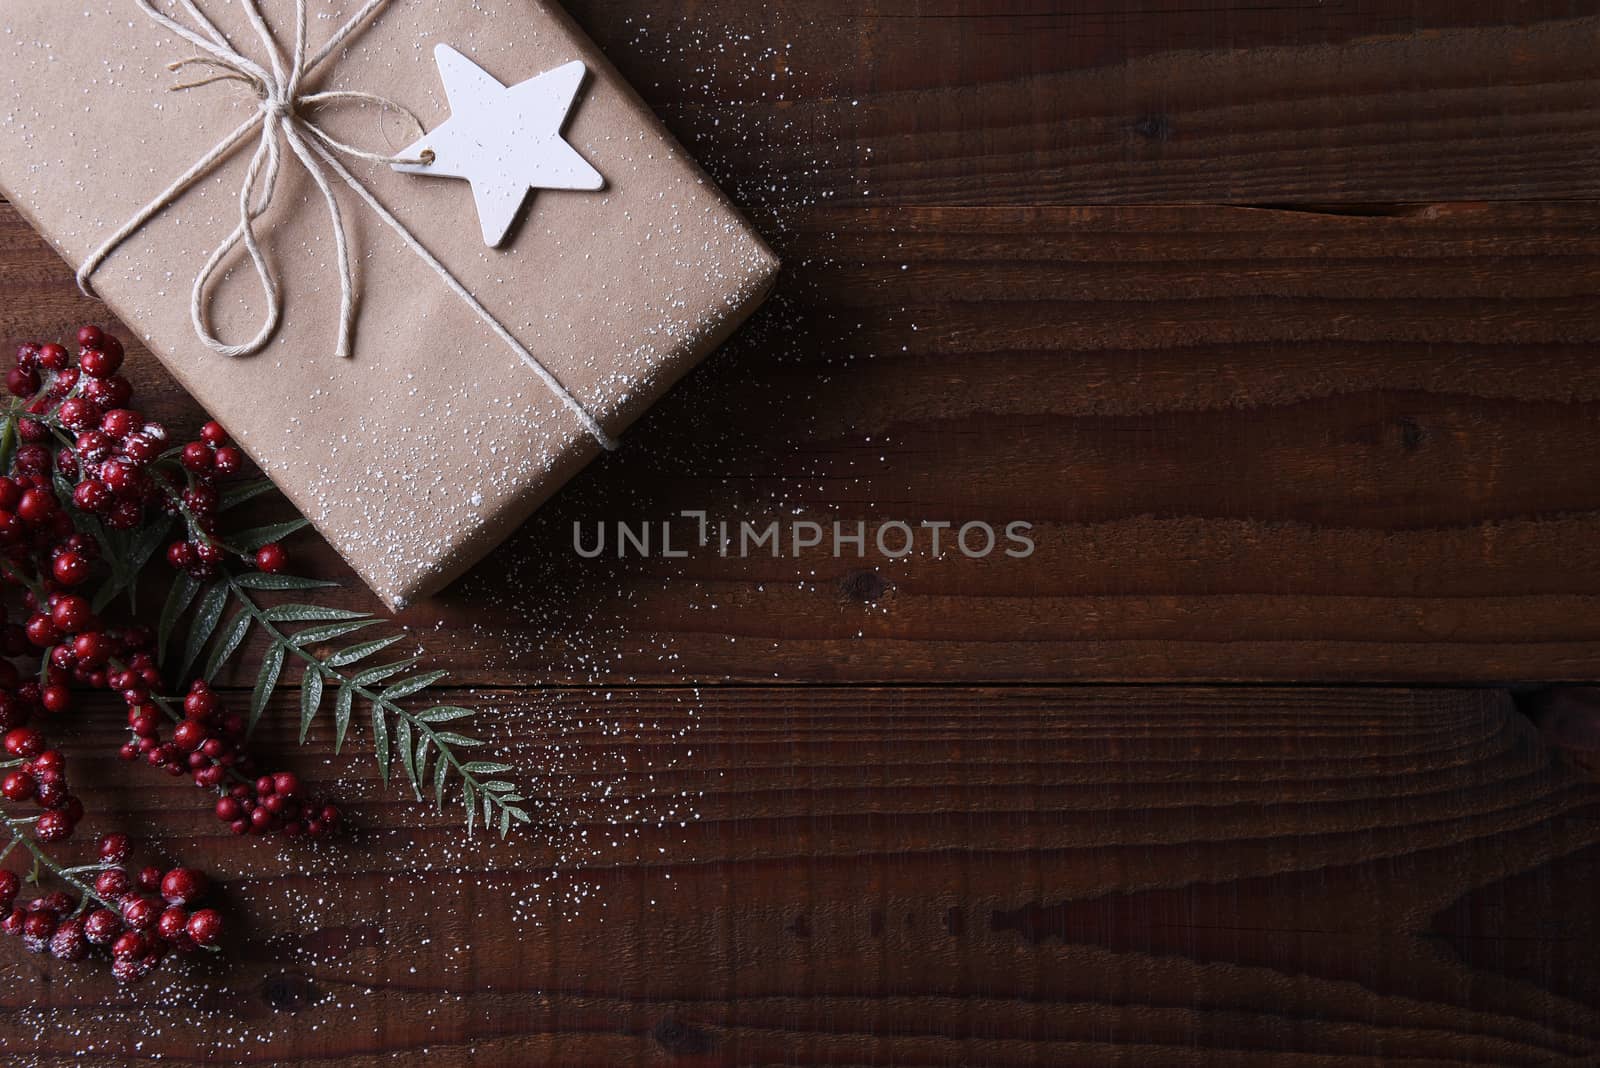 Top view of a plain brown paper Christmas present tied with string and a star shaped gift tag, Horizontal format with copy space.